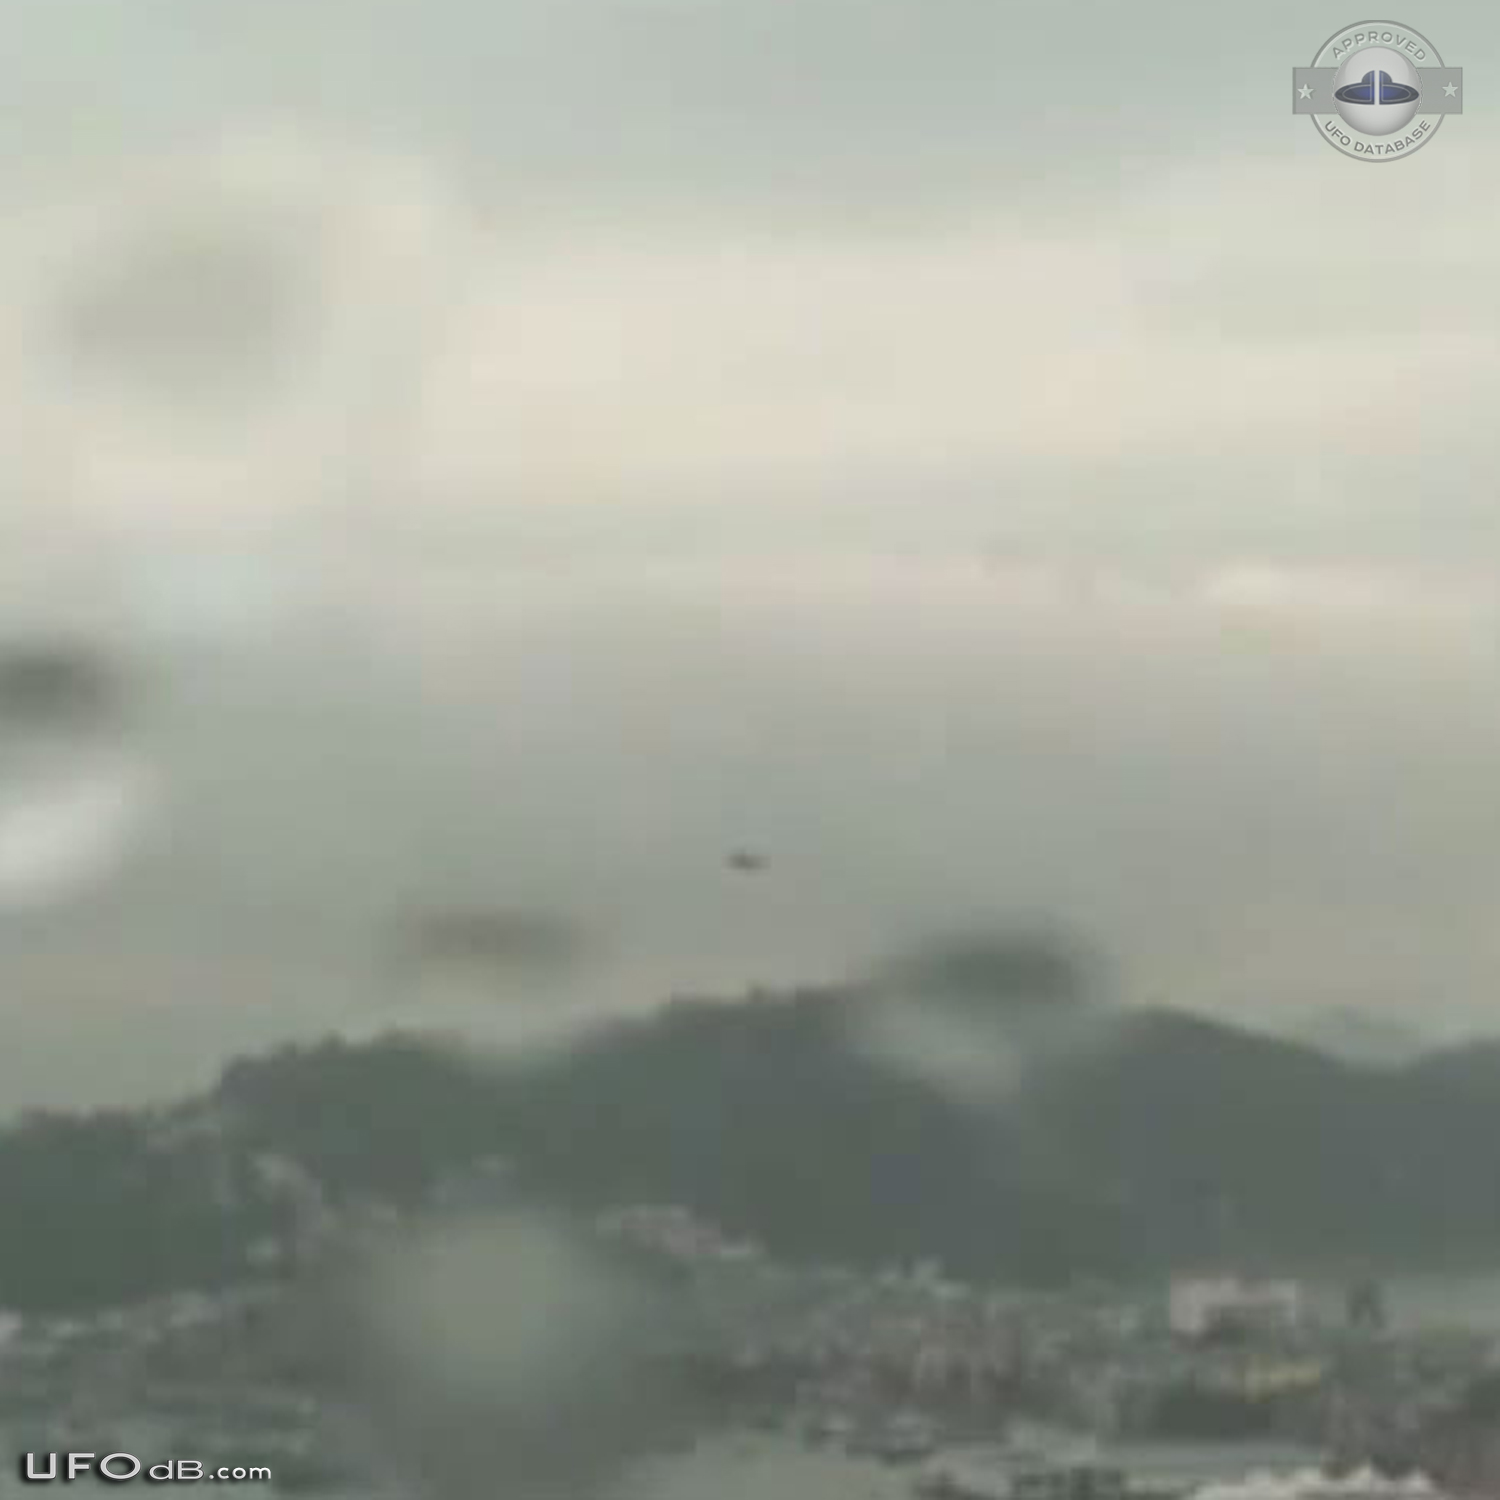 UFO caught on Picture by Hong Kong weather camera - April 2014 UFO Picture #567-4